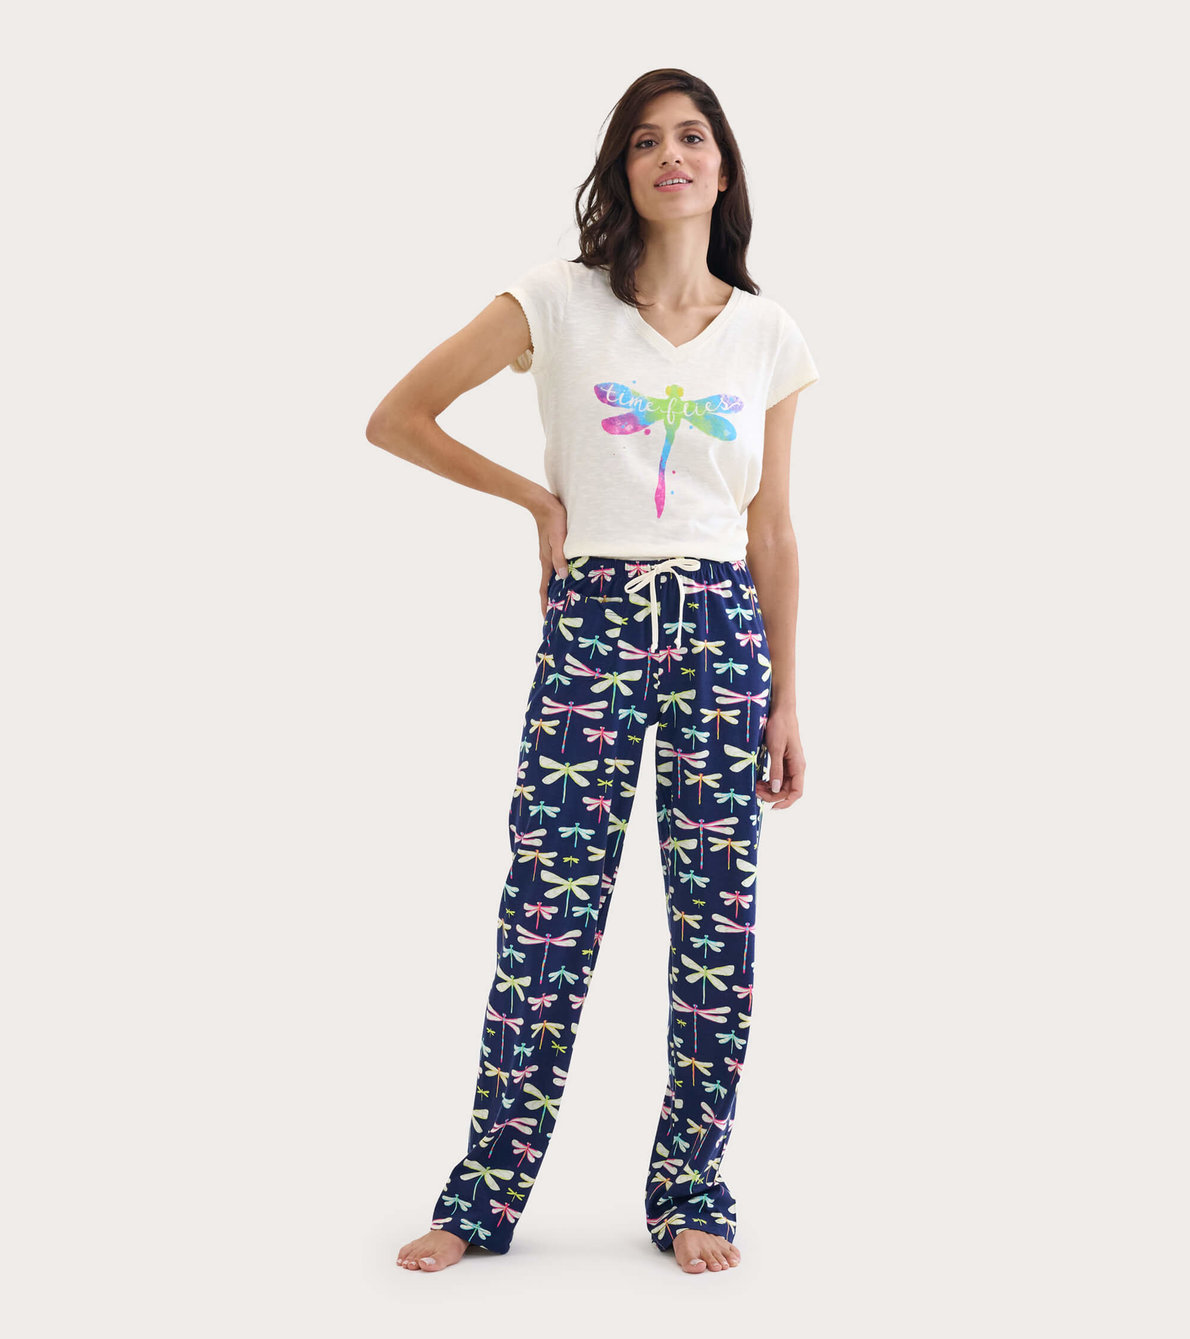 View larger image of Dragonfly Women's Tee and Pants Pajama Separates